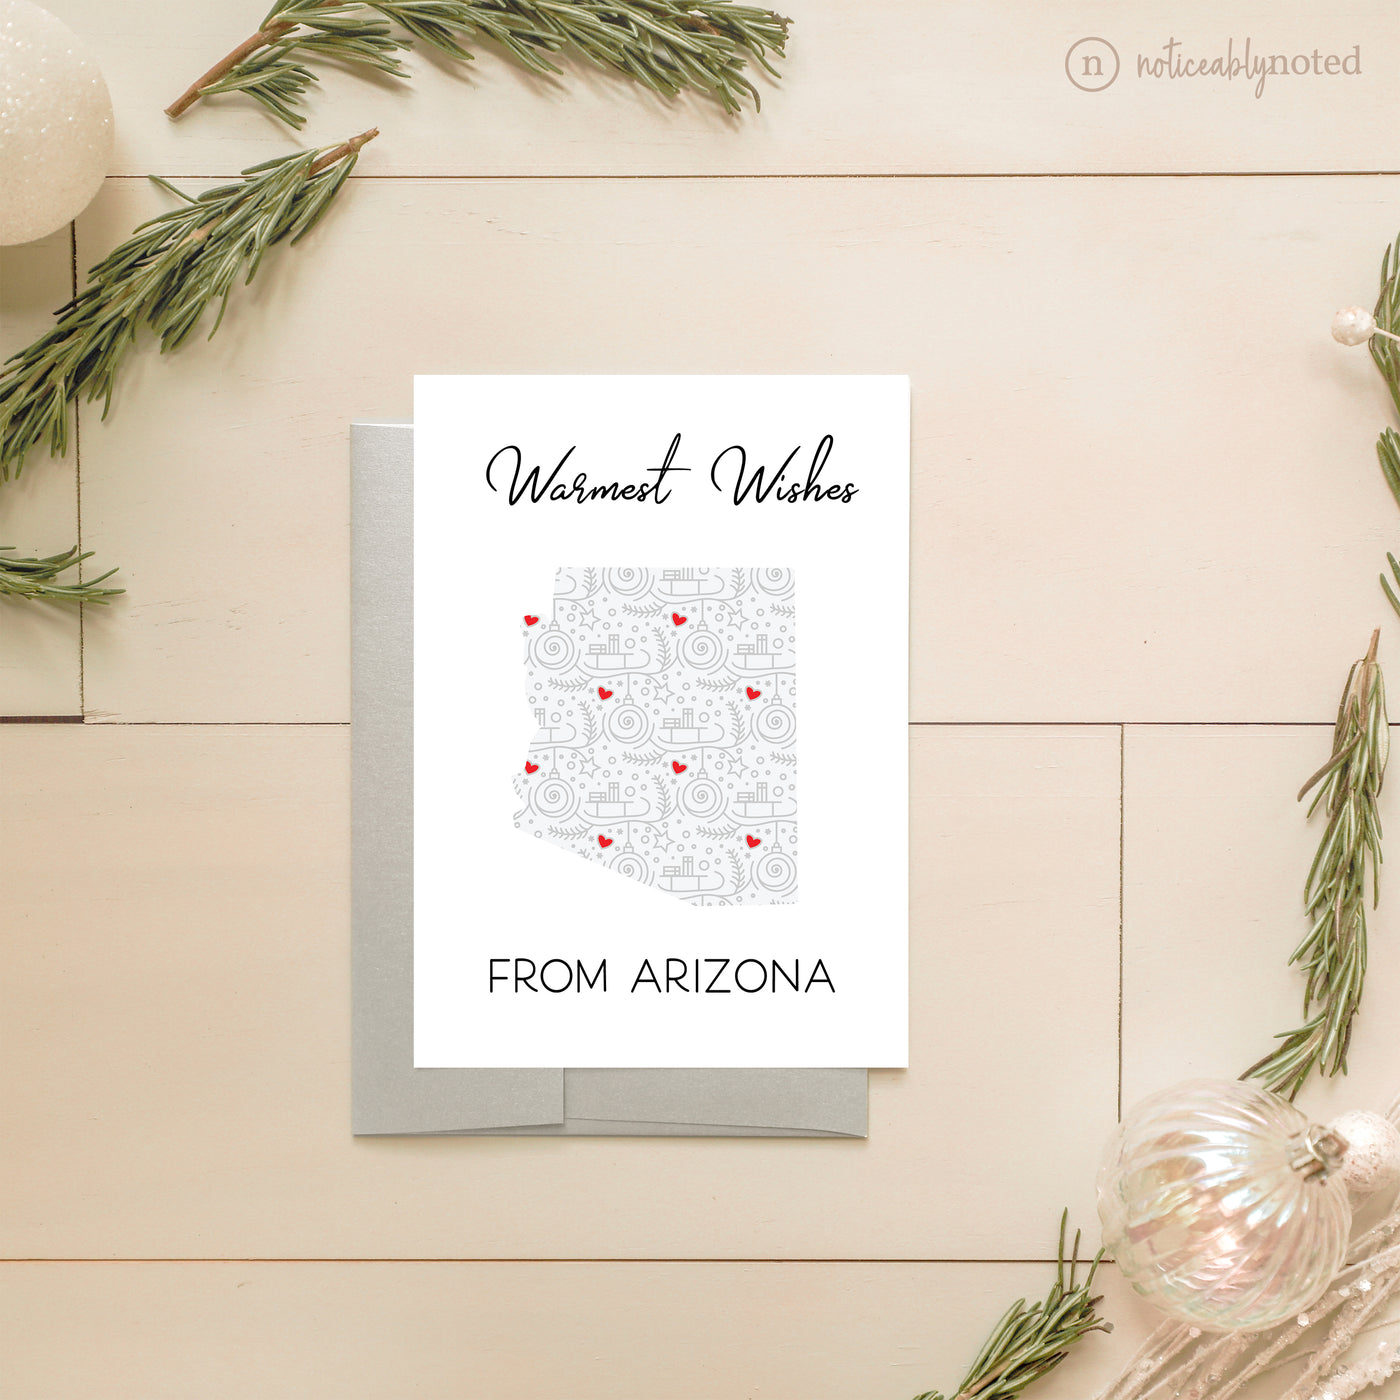 AZ Holiday Greeting Cards | Noticeably Noted